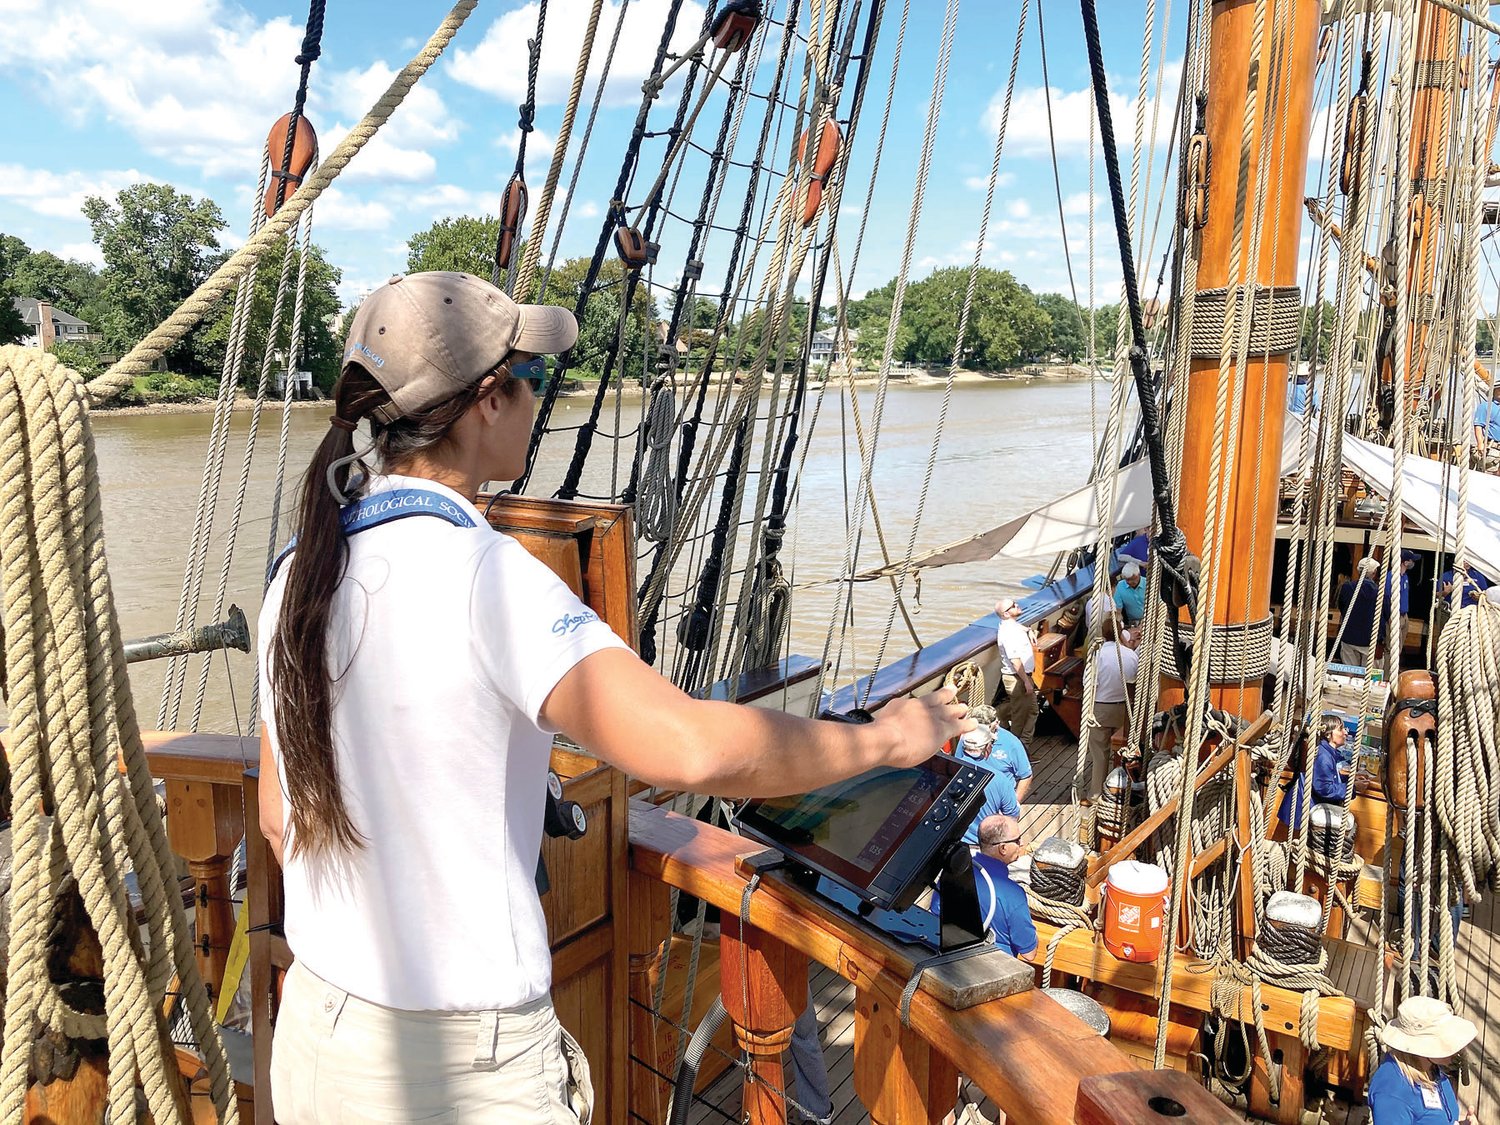 Captain Lauren Morgens guides the tall ship on its Delaware River excursion.